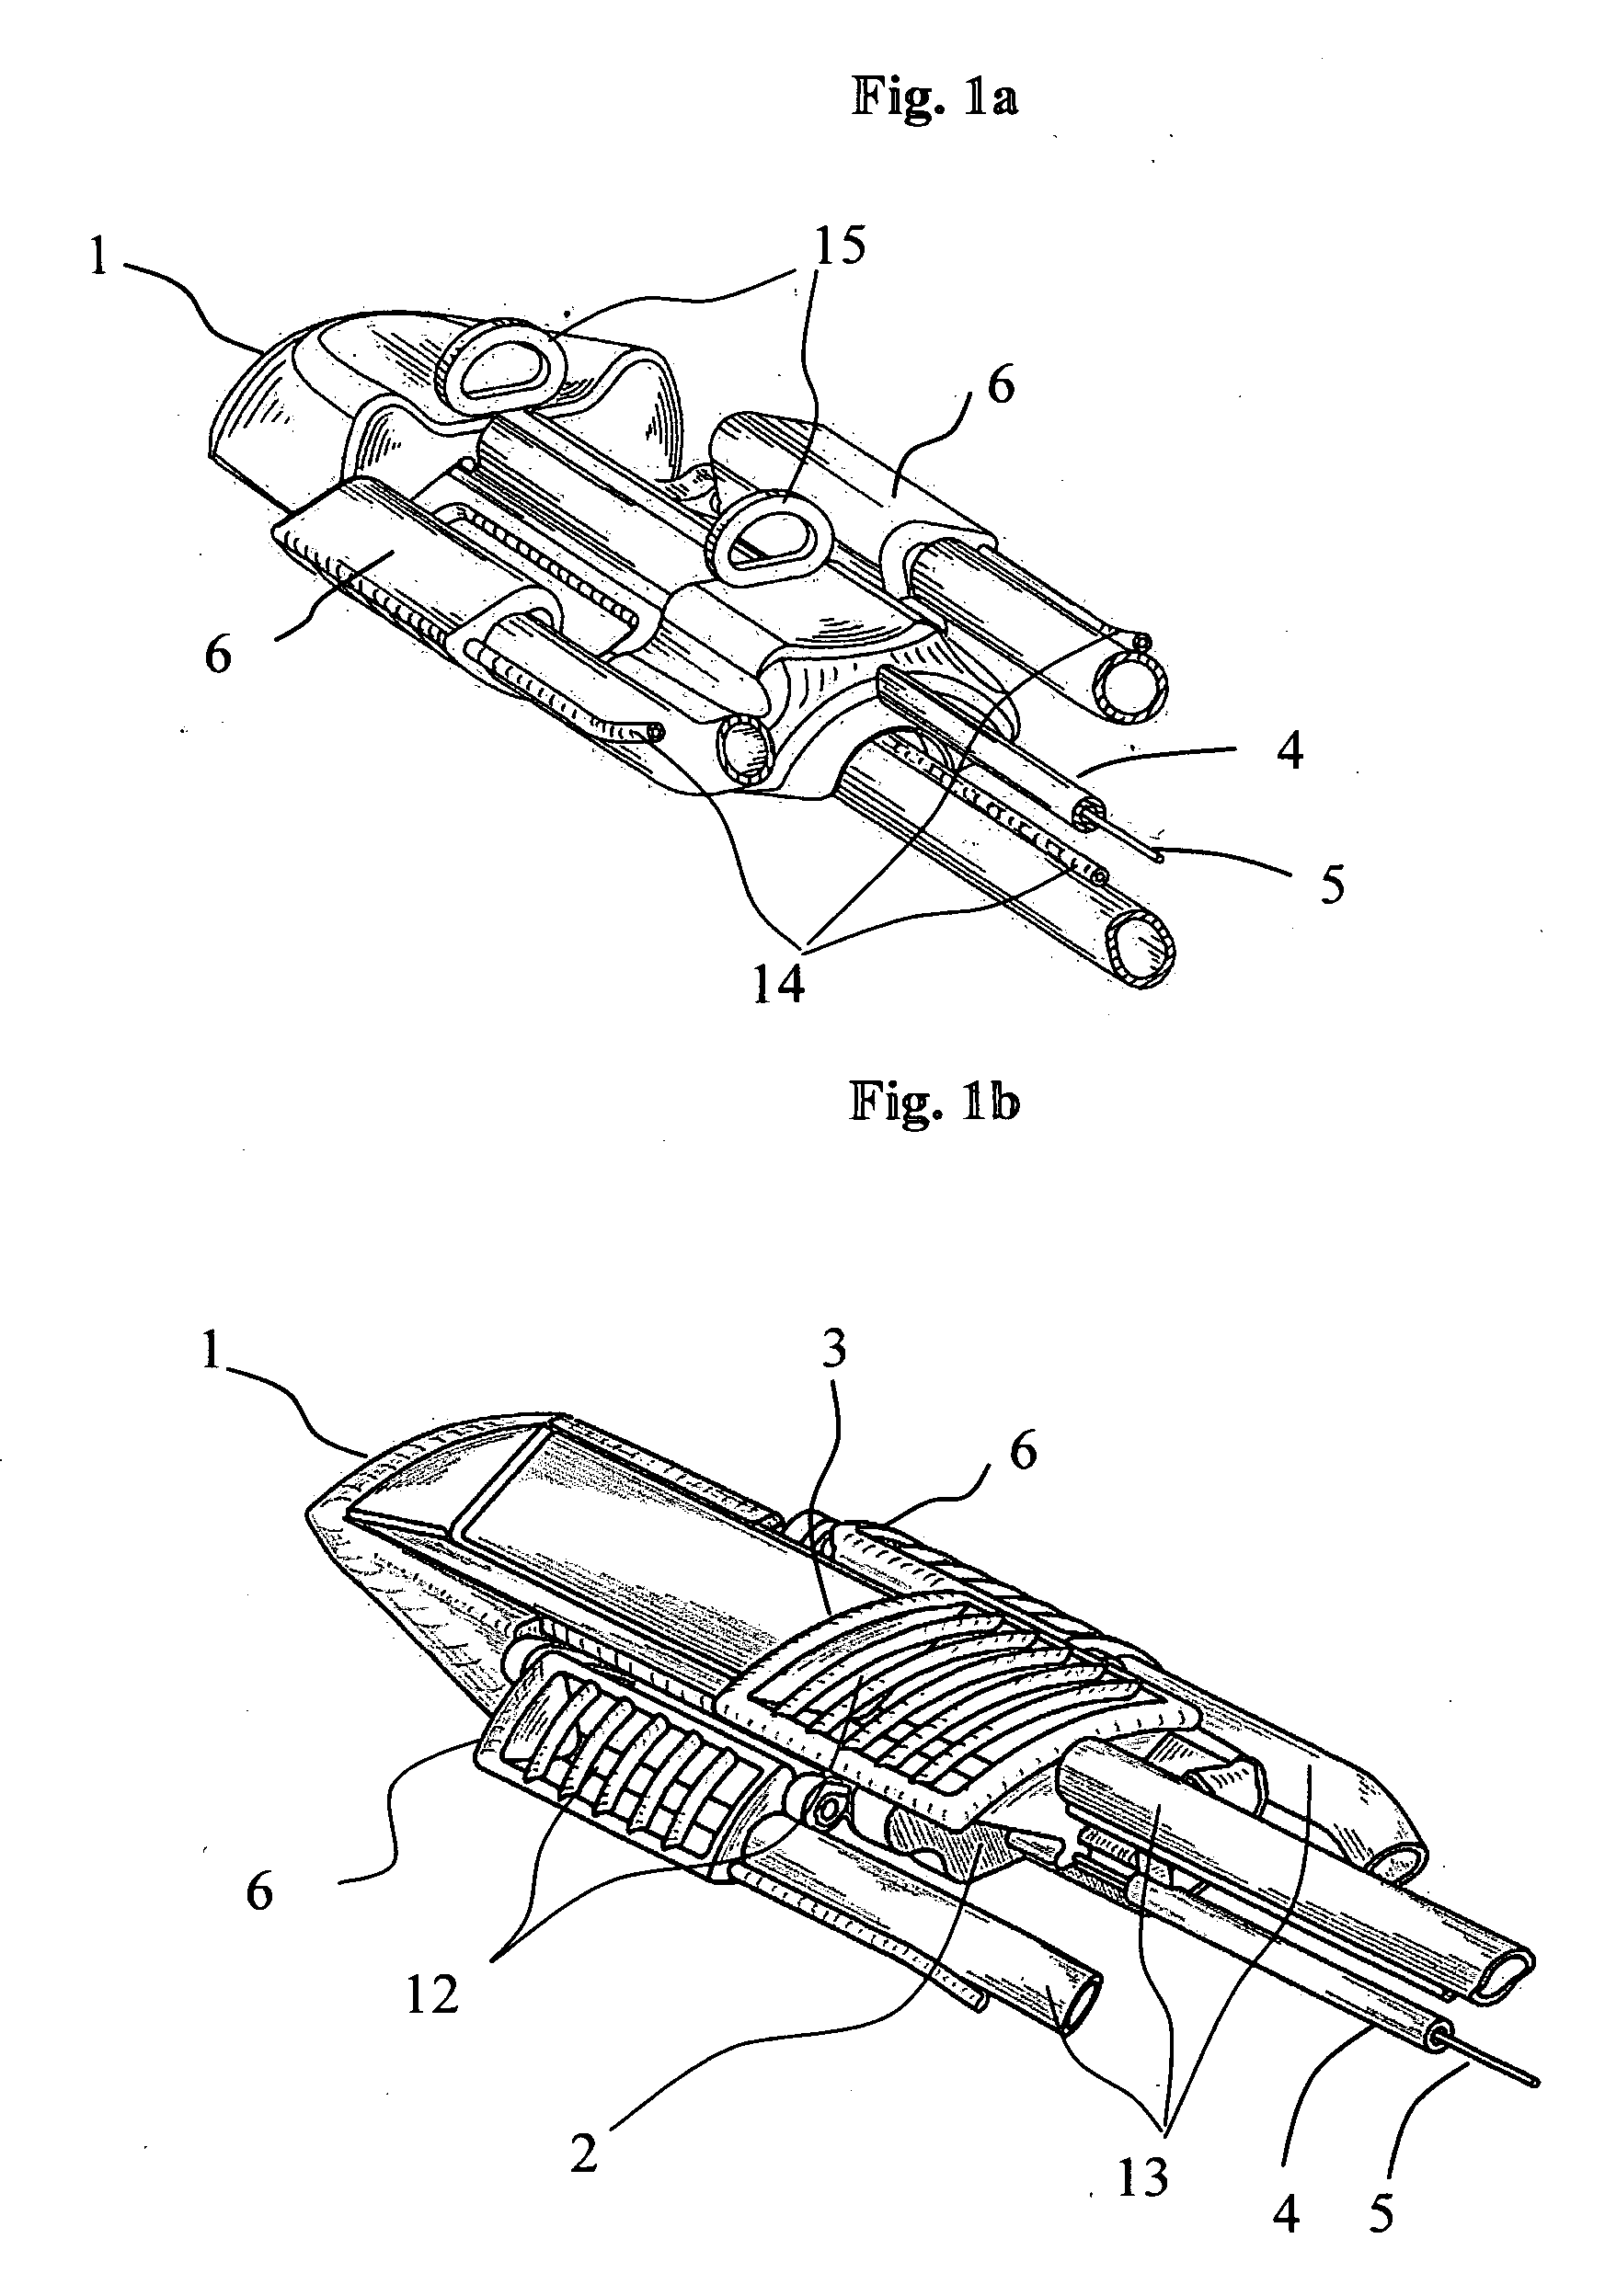 Endoscopic device insertable into a body cavity and movable in a predetermined direction, and method of moving the endoscopic device in the body cavity